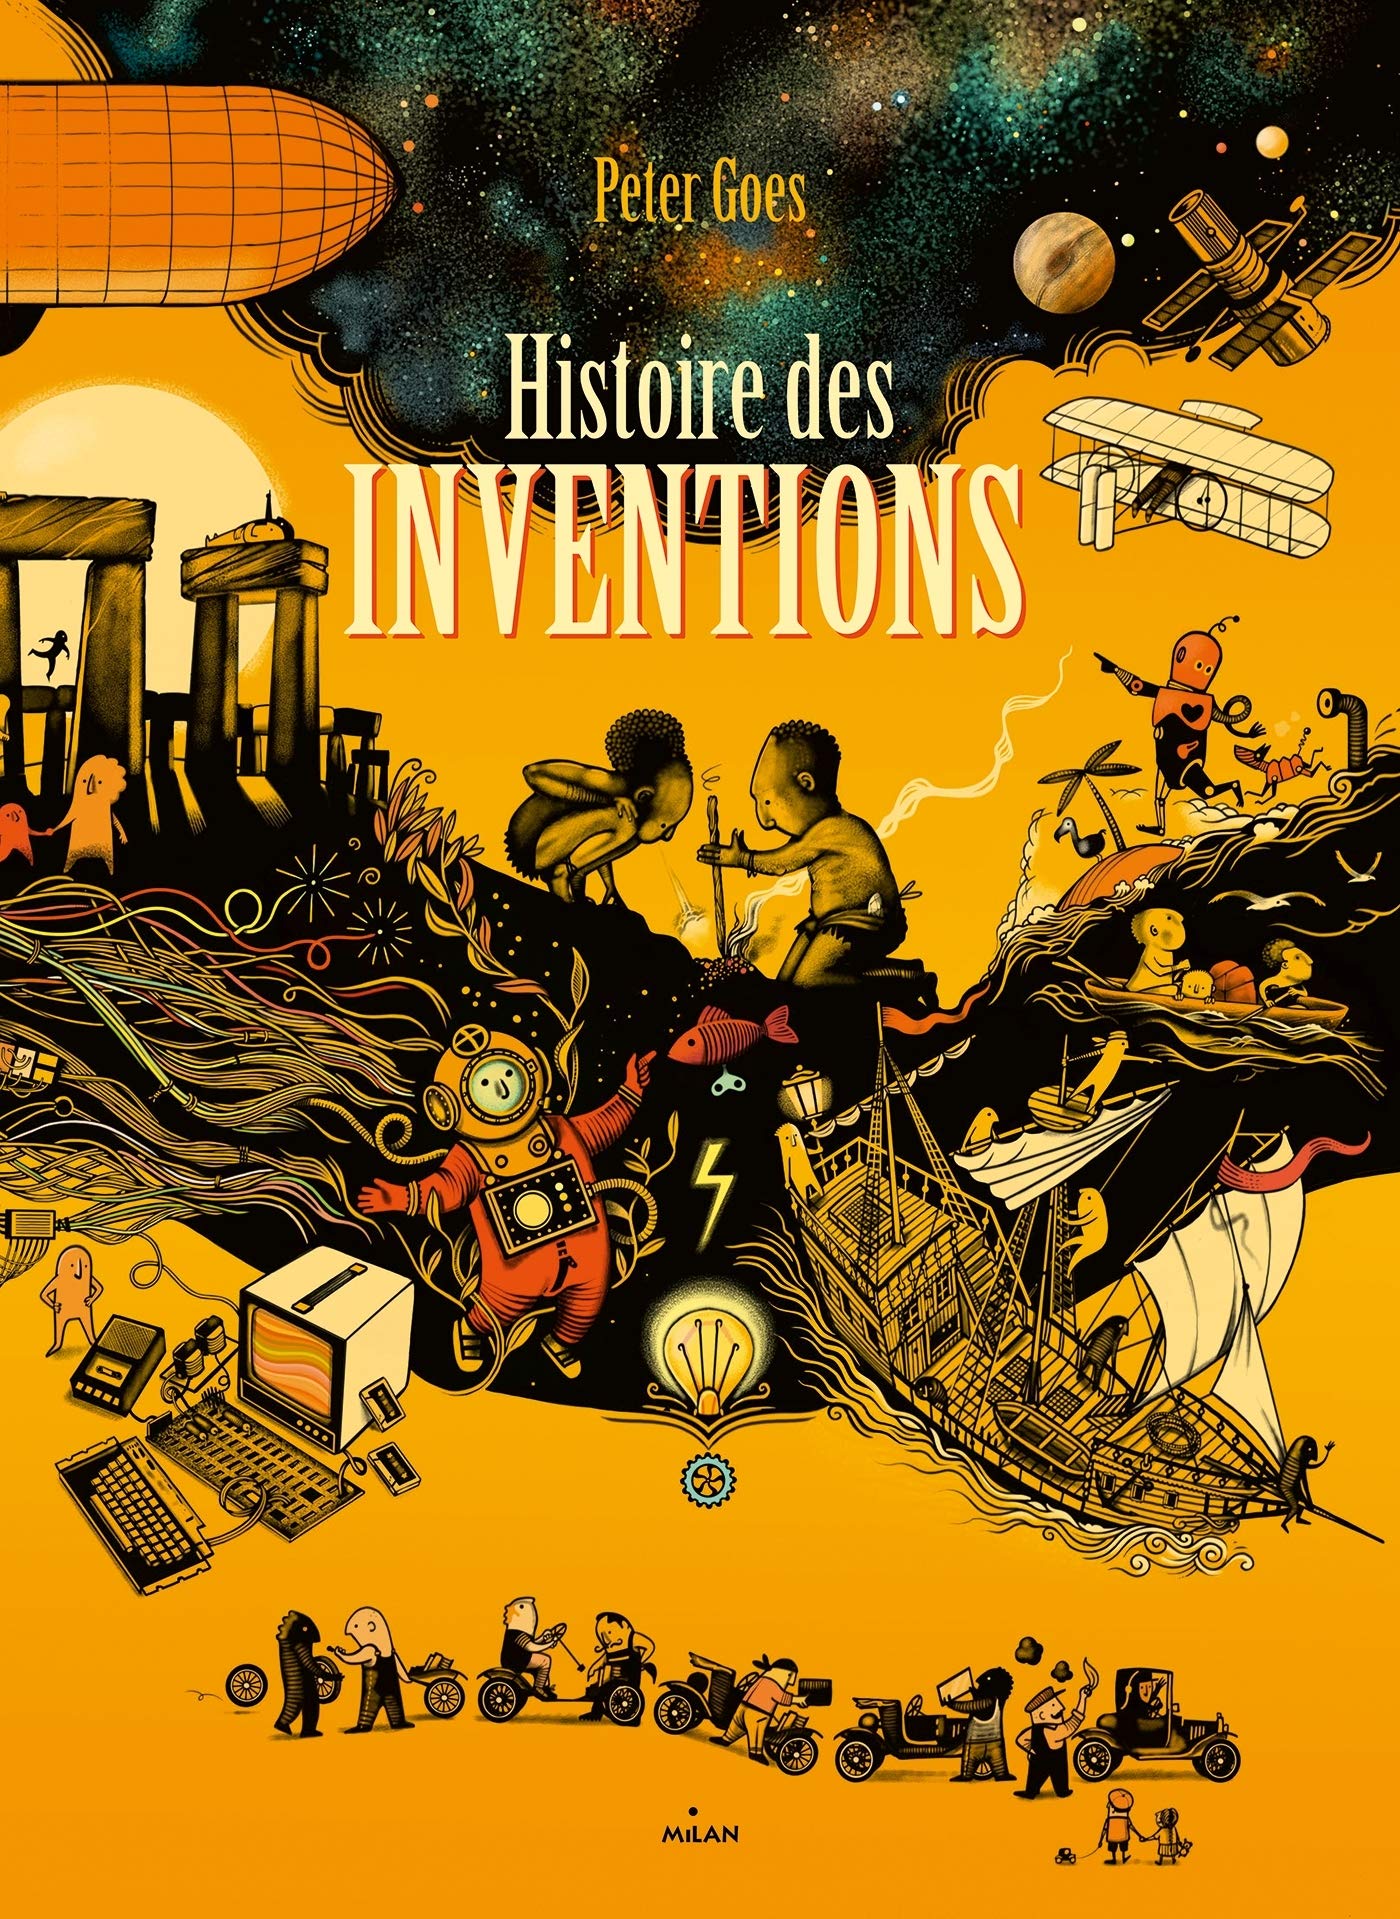 histoiredesinventions goes